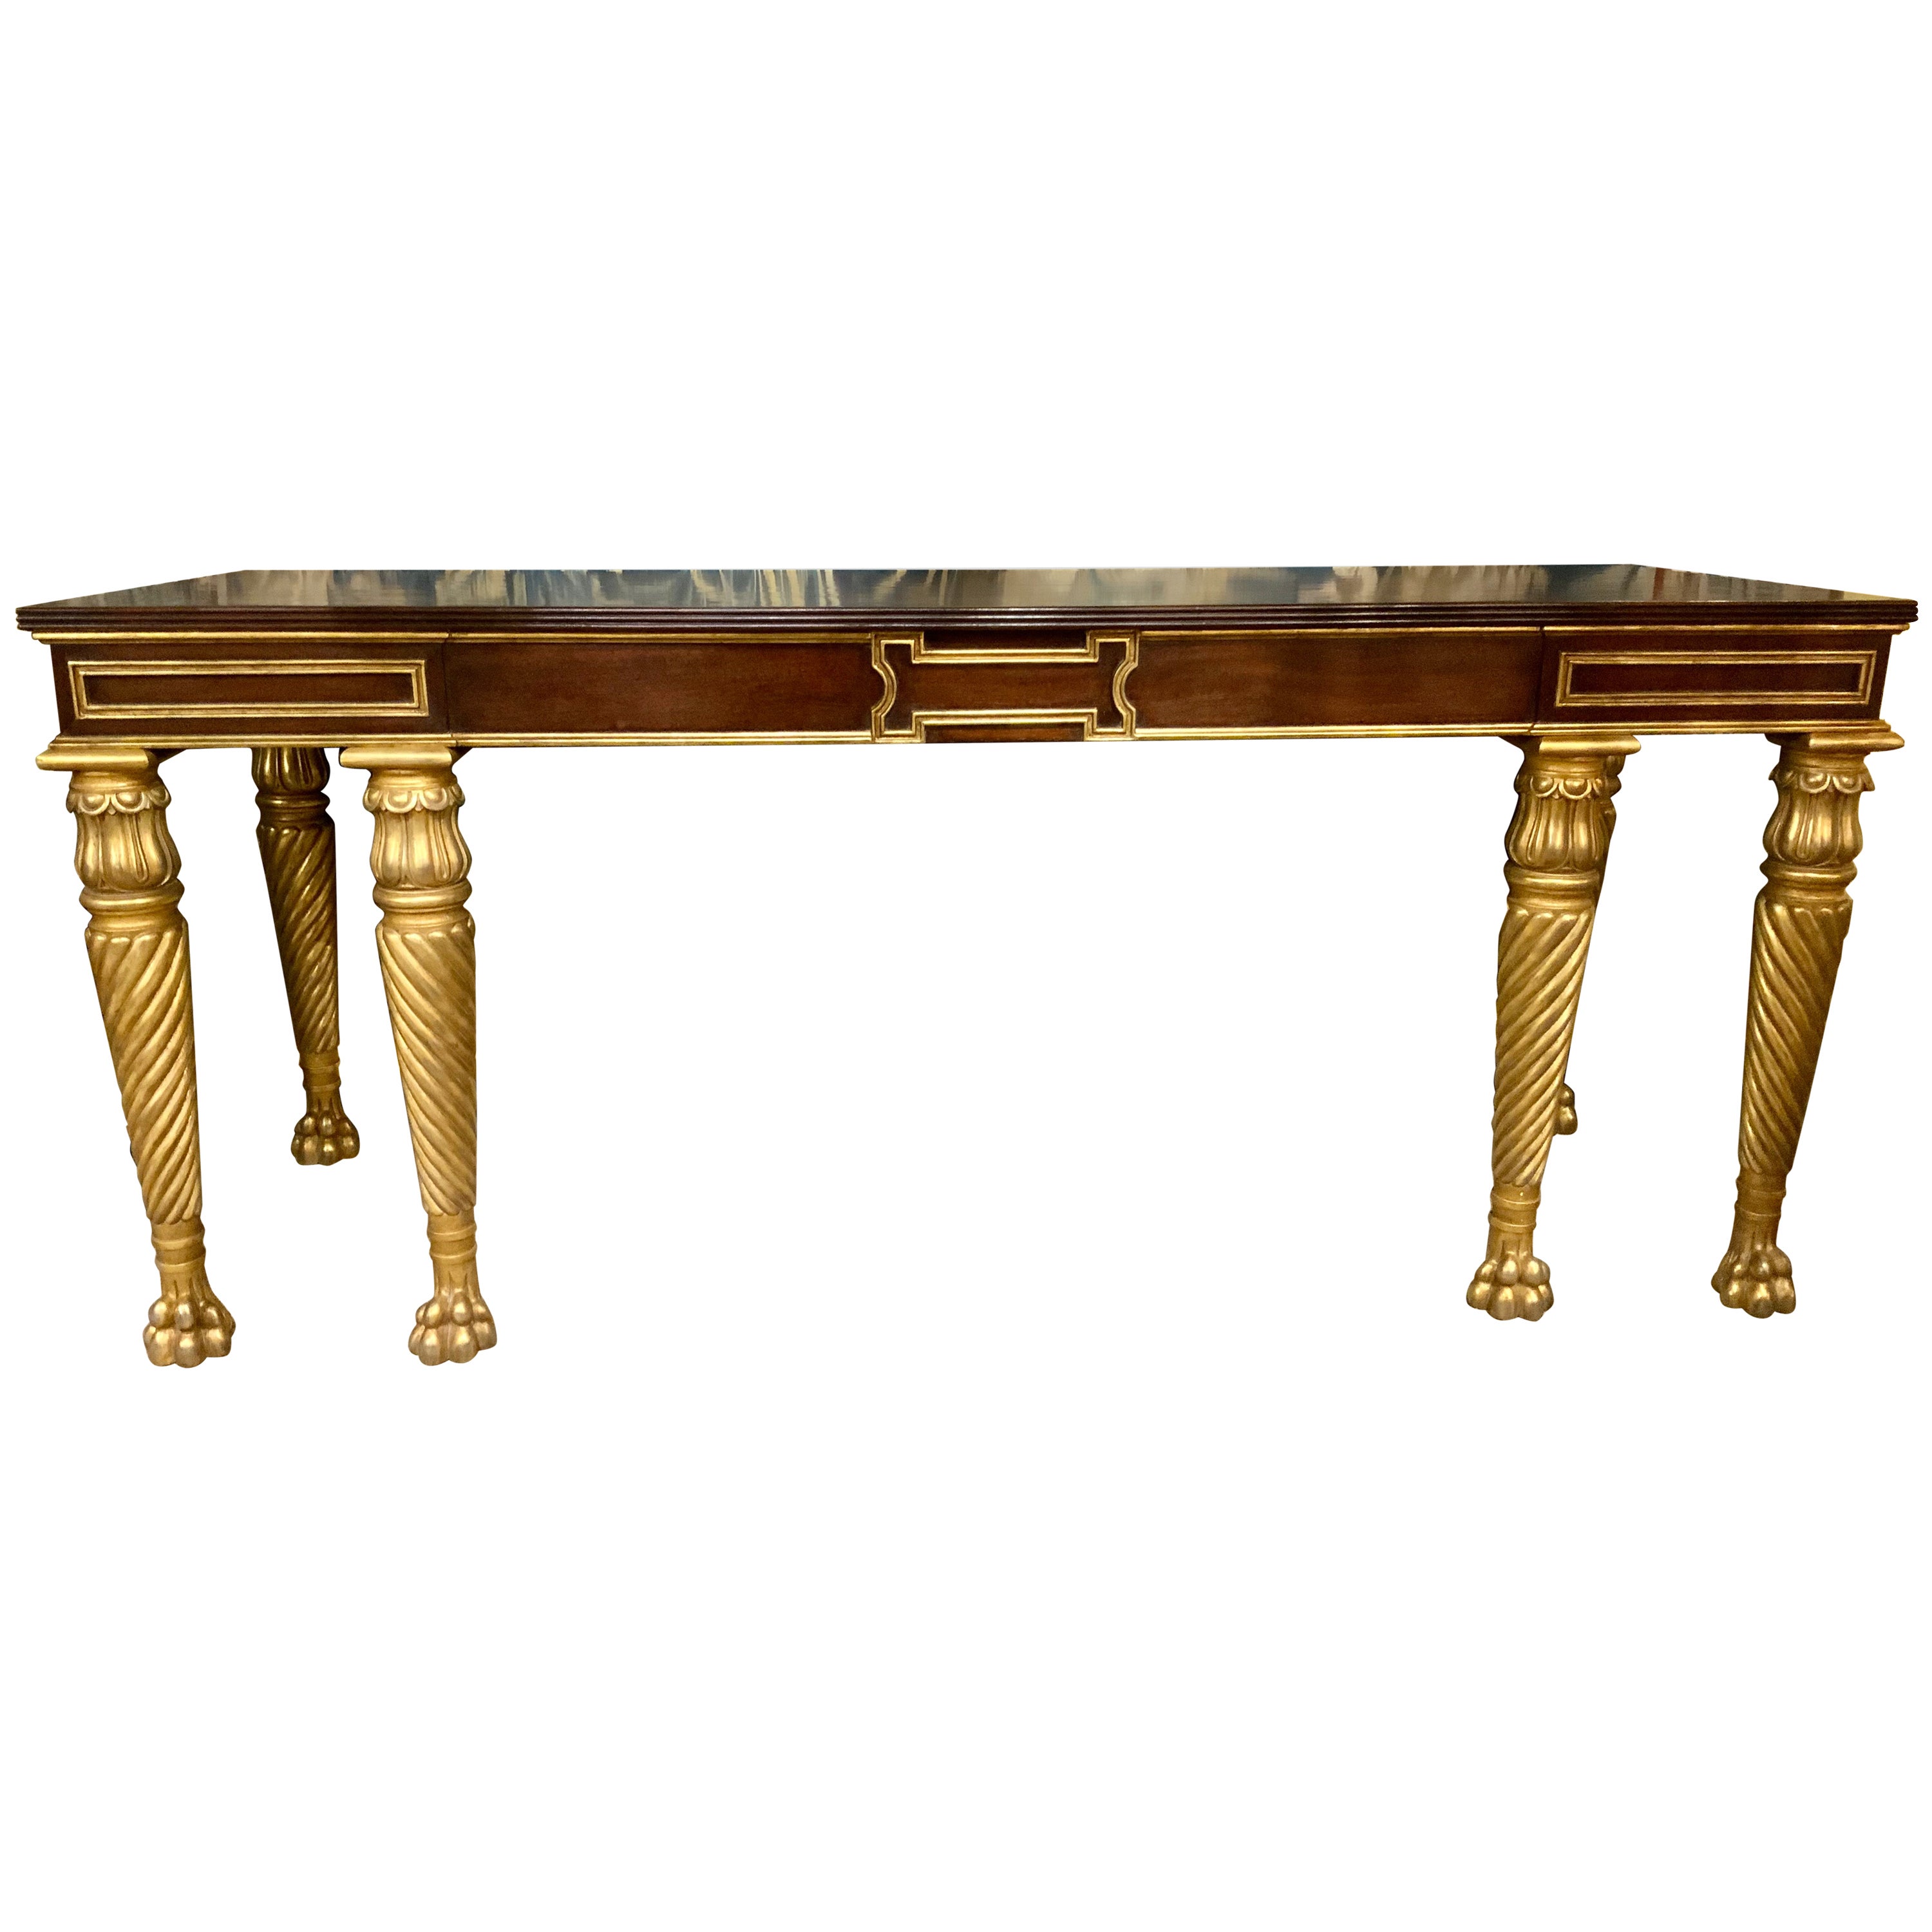 Mahogany Console with Gilt Carved Legs and Designs in Neoclassical Taste For Sale